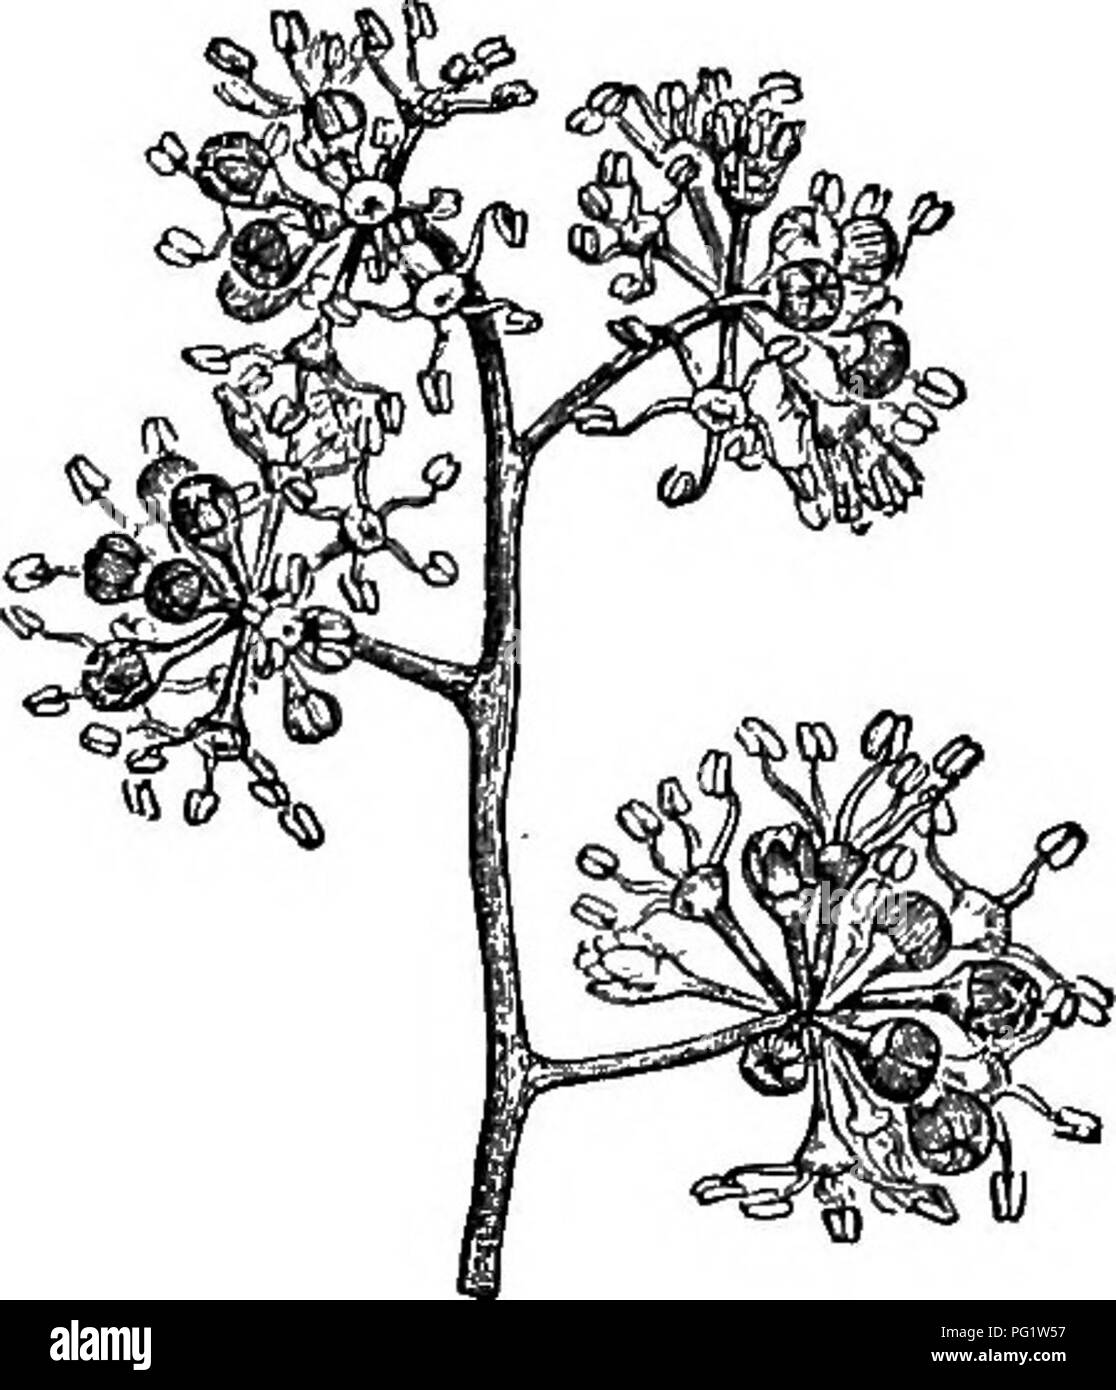 . The natural history of plants. Botany. VMBELLIFEBM. 161 Heptapleunm (fig. 201) belongs to the same genus as Scheffleva. When their flowers are pentamerous, as is very frequently the case, it is distinct (as a section) by only a single character : the shortness of the stylary lobes. The common por- tion of the style is very variable in length, ' ^'''''^''-^[fZT&quot;''&quot;'&quot;^ sometimes very depressed or almost nil, sometimes extended in a very prominent cone. Such it appears, among others, in Agalma, whose inflorescence is racemiform, and in some species of Astropanax, whose flowers, l Stock Photo